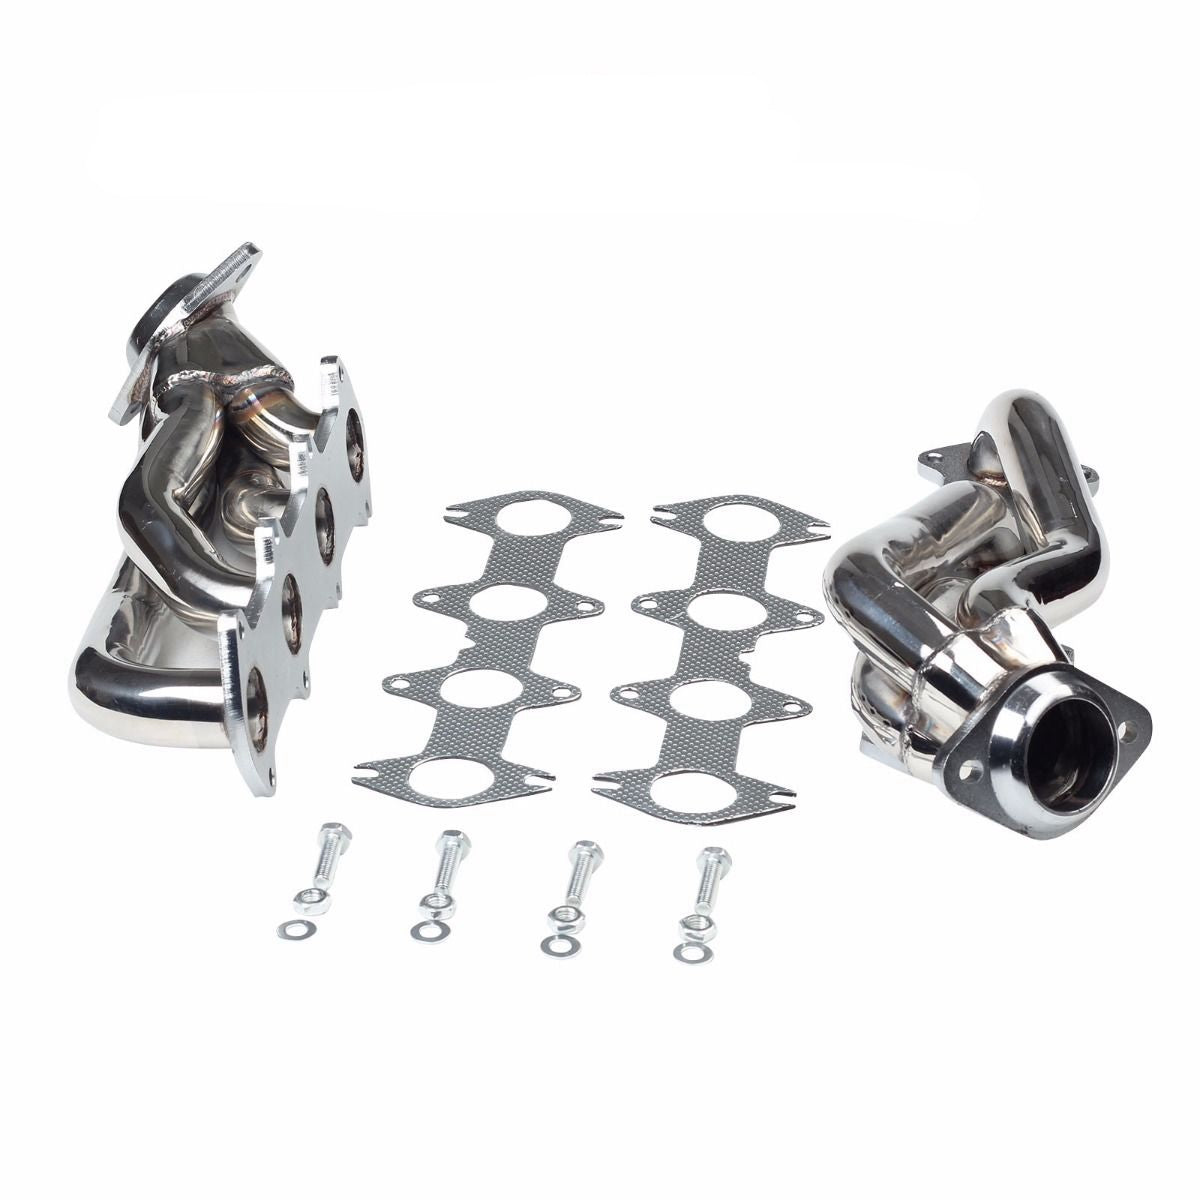 Exhaust Manifold Shorty Headers For Ford F150 5.4L V8 Engine